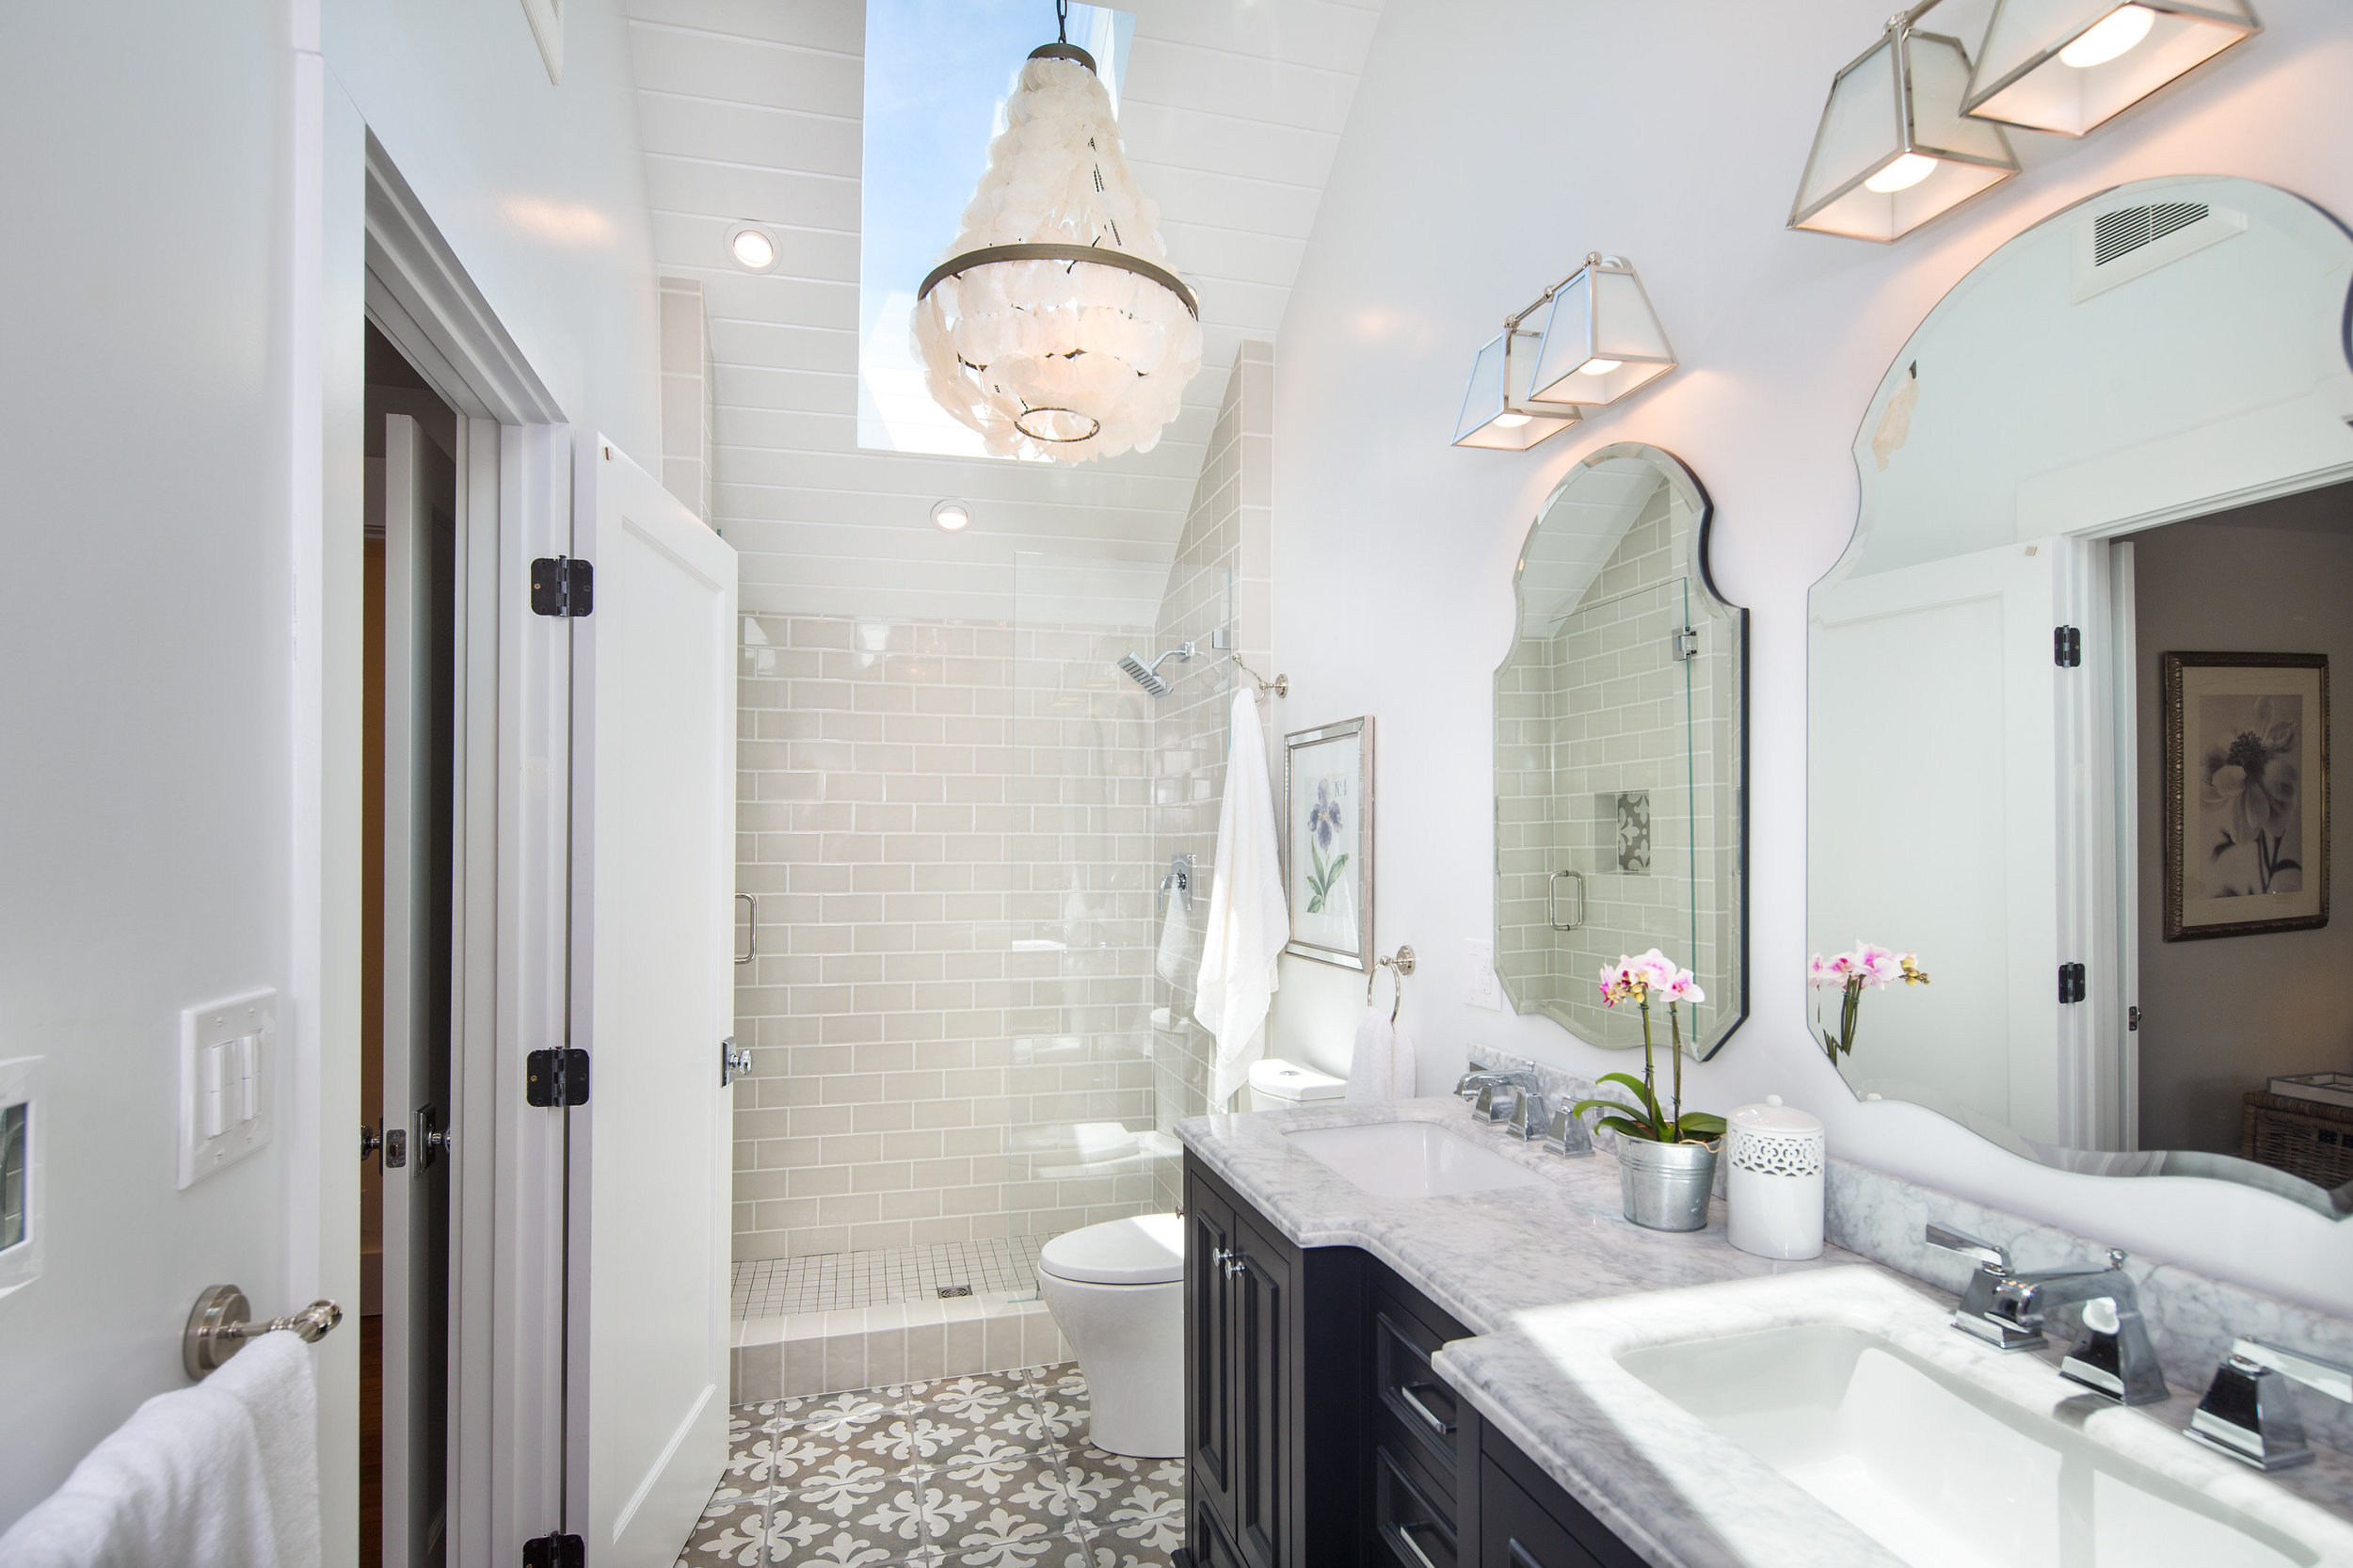 before and after bathroom renovation ideas in Oakland, Glenview